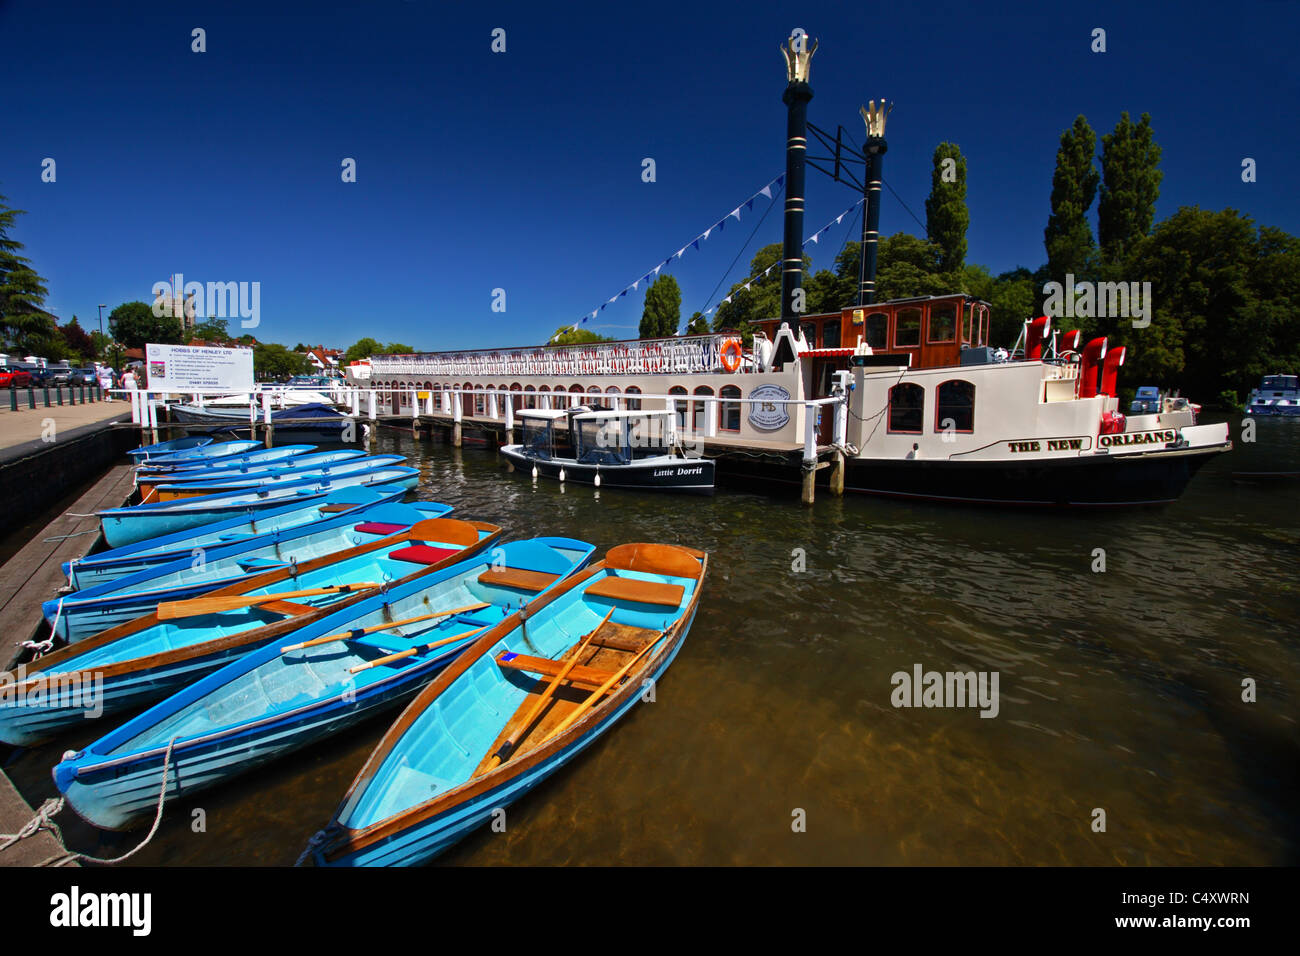 The New Orleans, a Mississippi style paddle riverboat and blue rowing boats on the River Thames at Henley-on-Thames, Oxfordshire Stock Photo